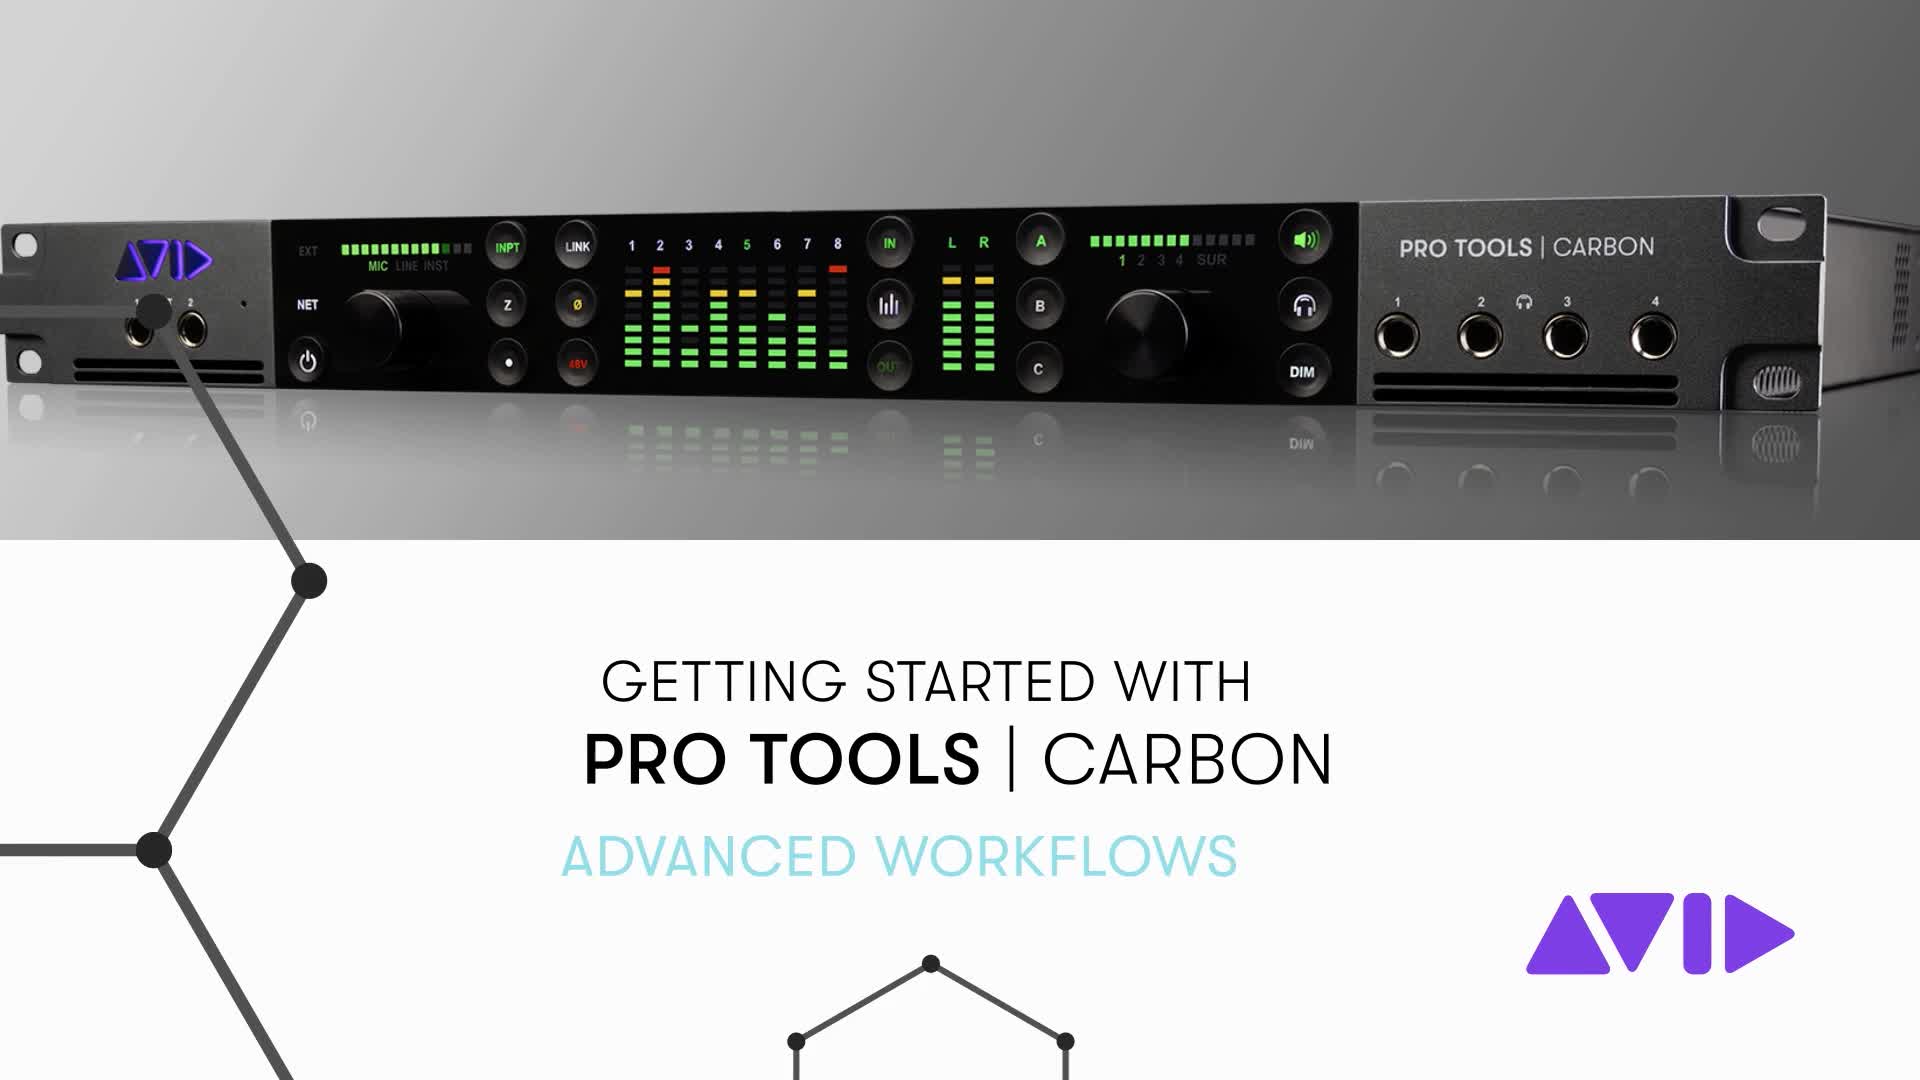 09 Pro Tools Carbon Getting Started - Advanced Workflows